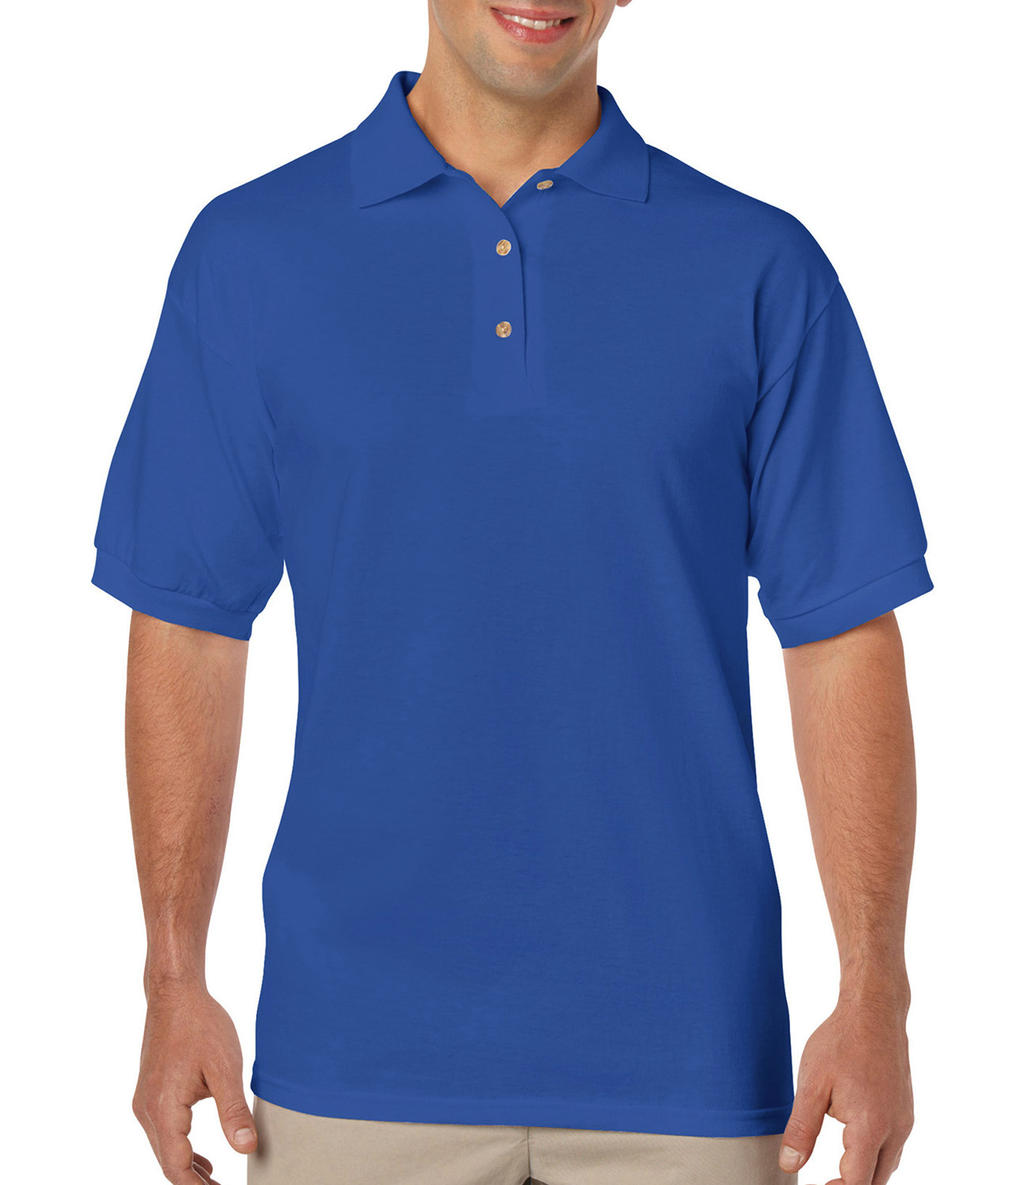  DryBlend Adult Jersey Polo in Farbe Royal